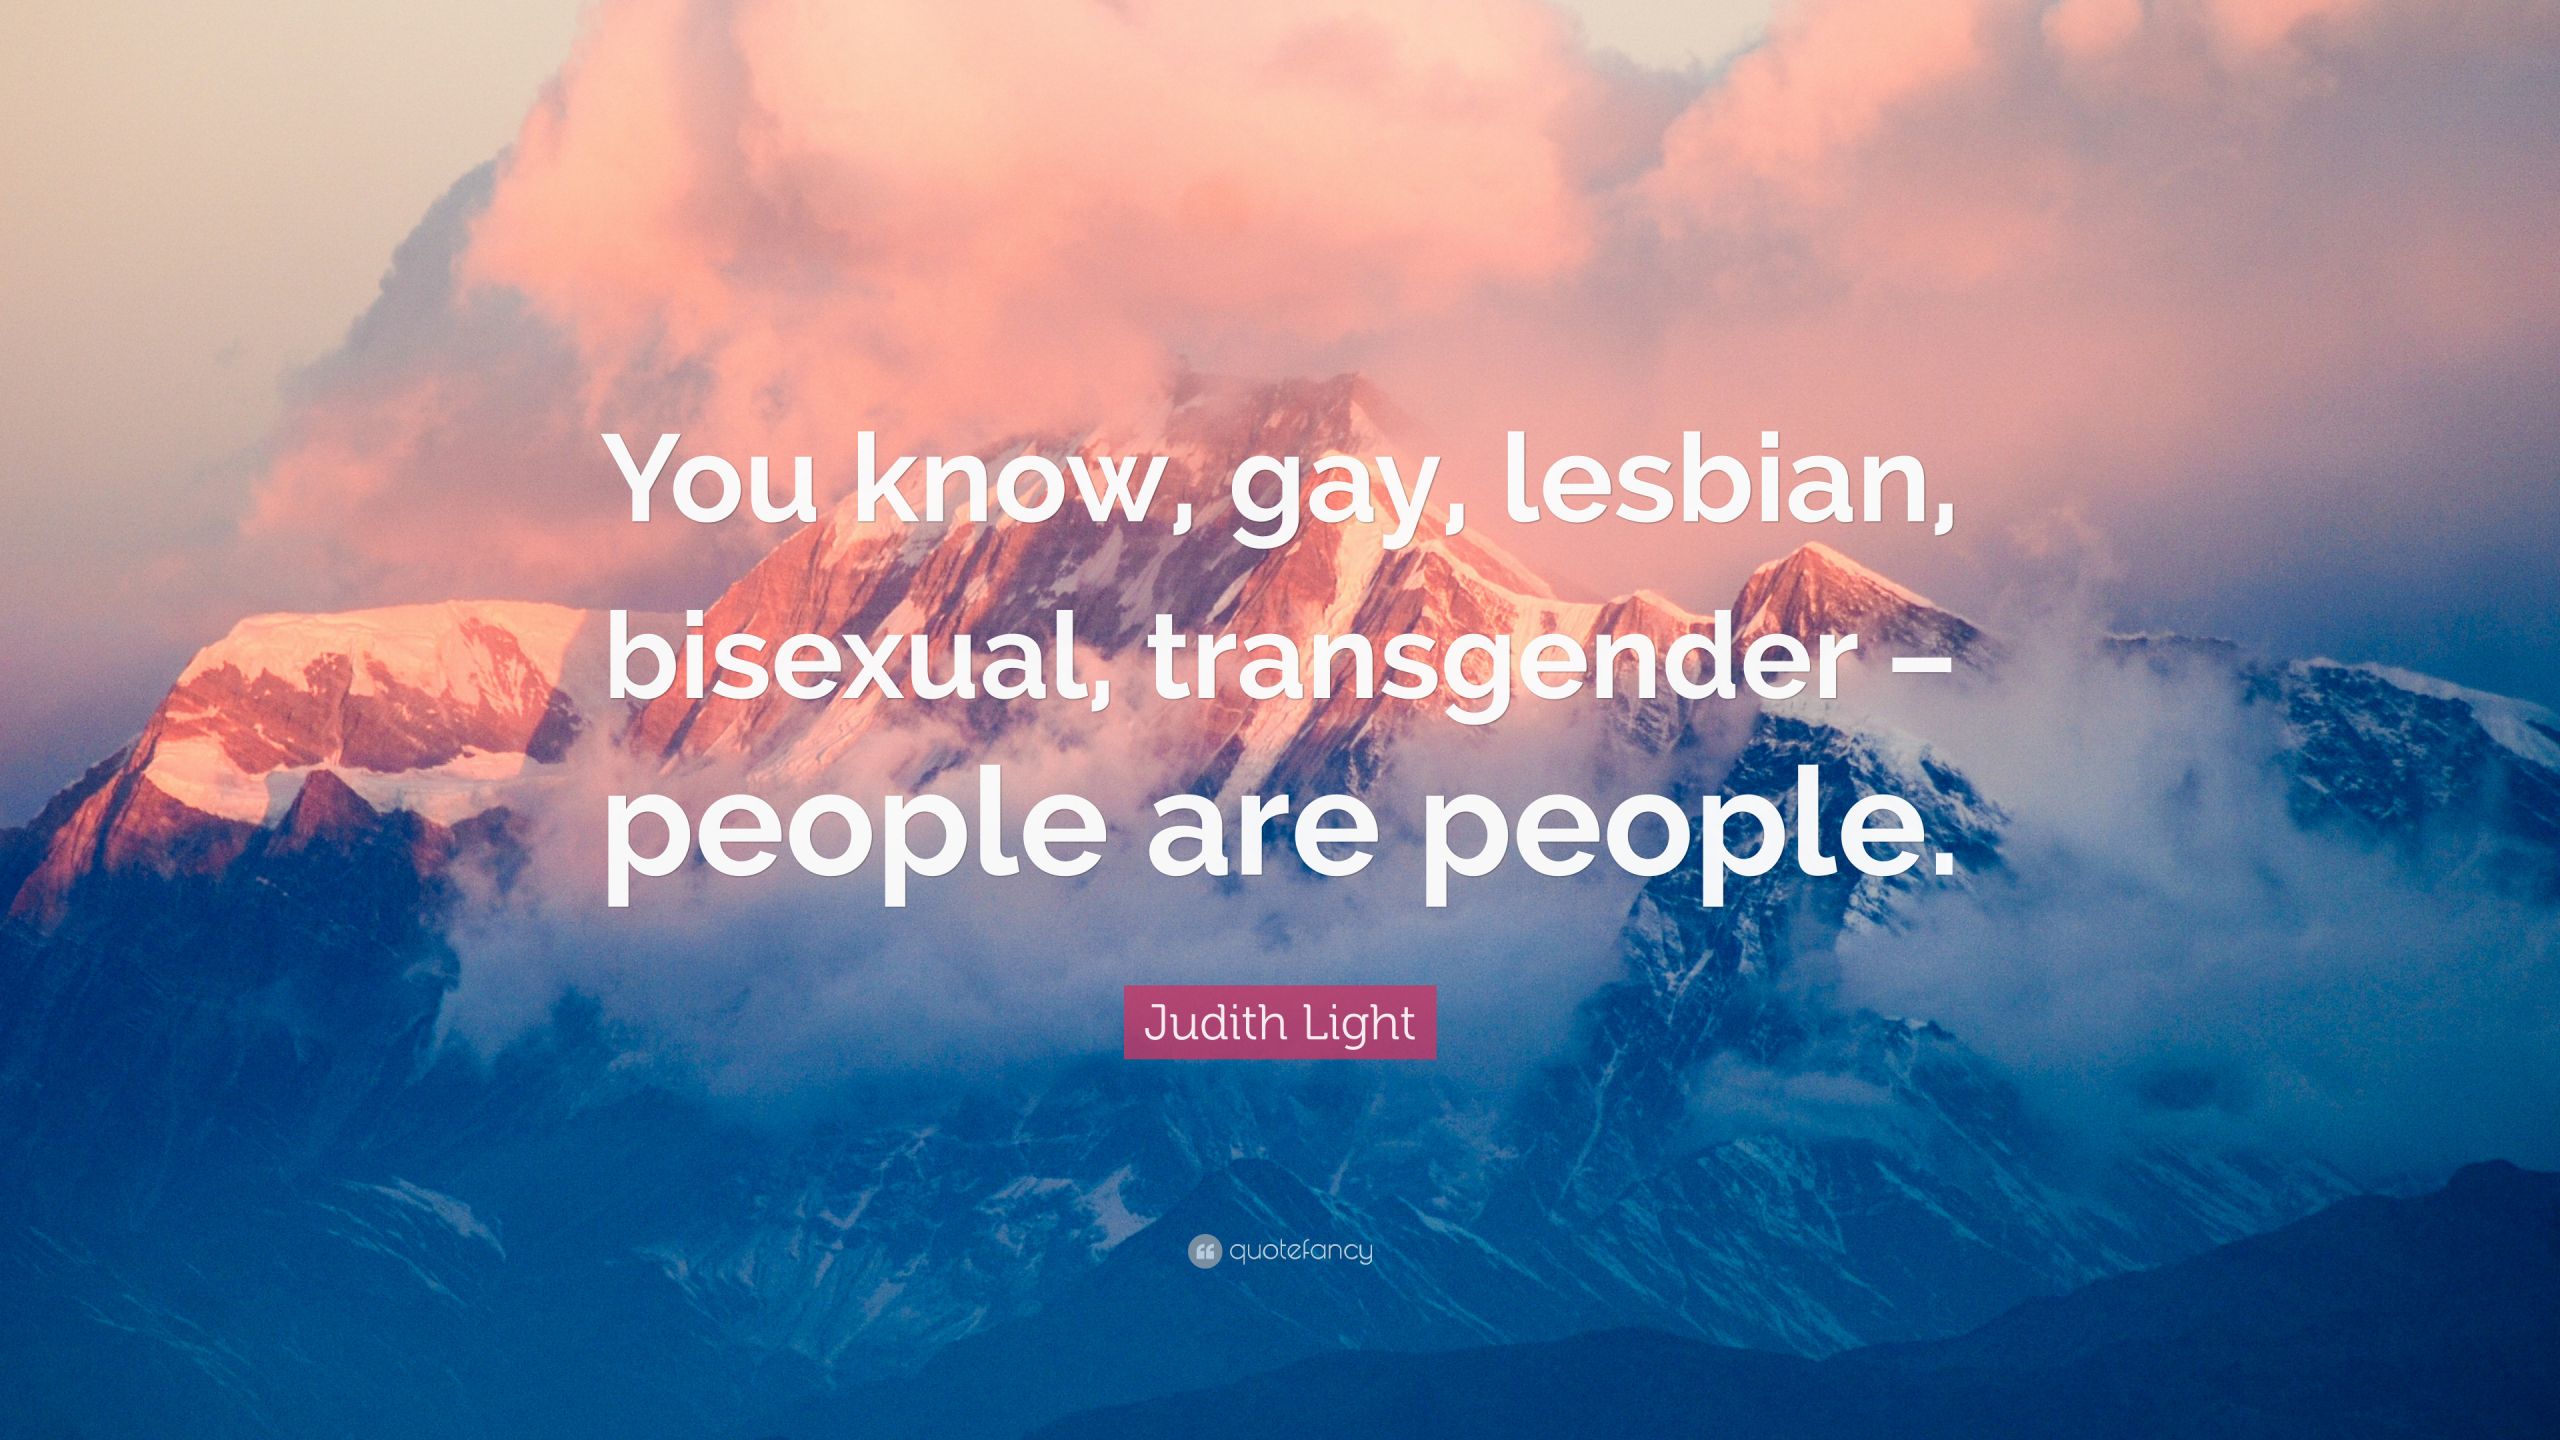 Gay Inspirational Quote
 Judith Light Quote “You know lesbian bi ual